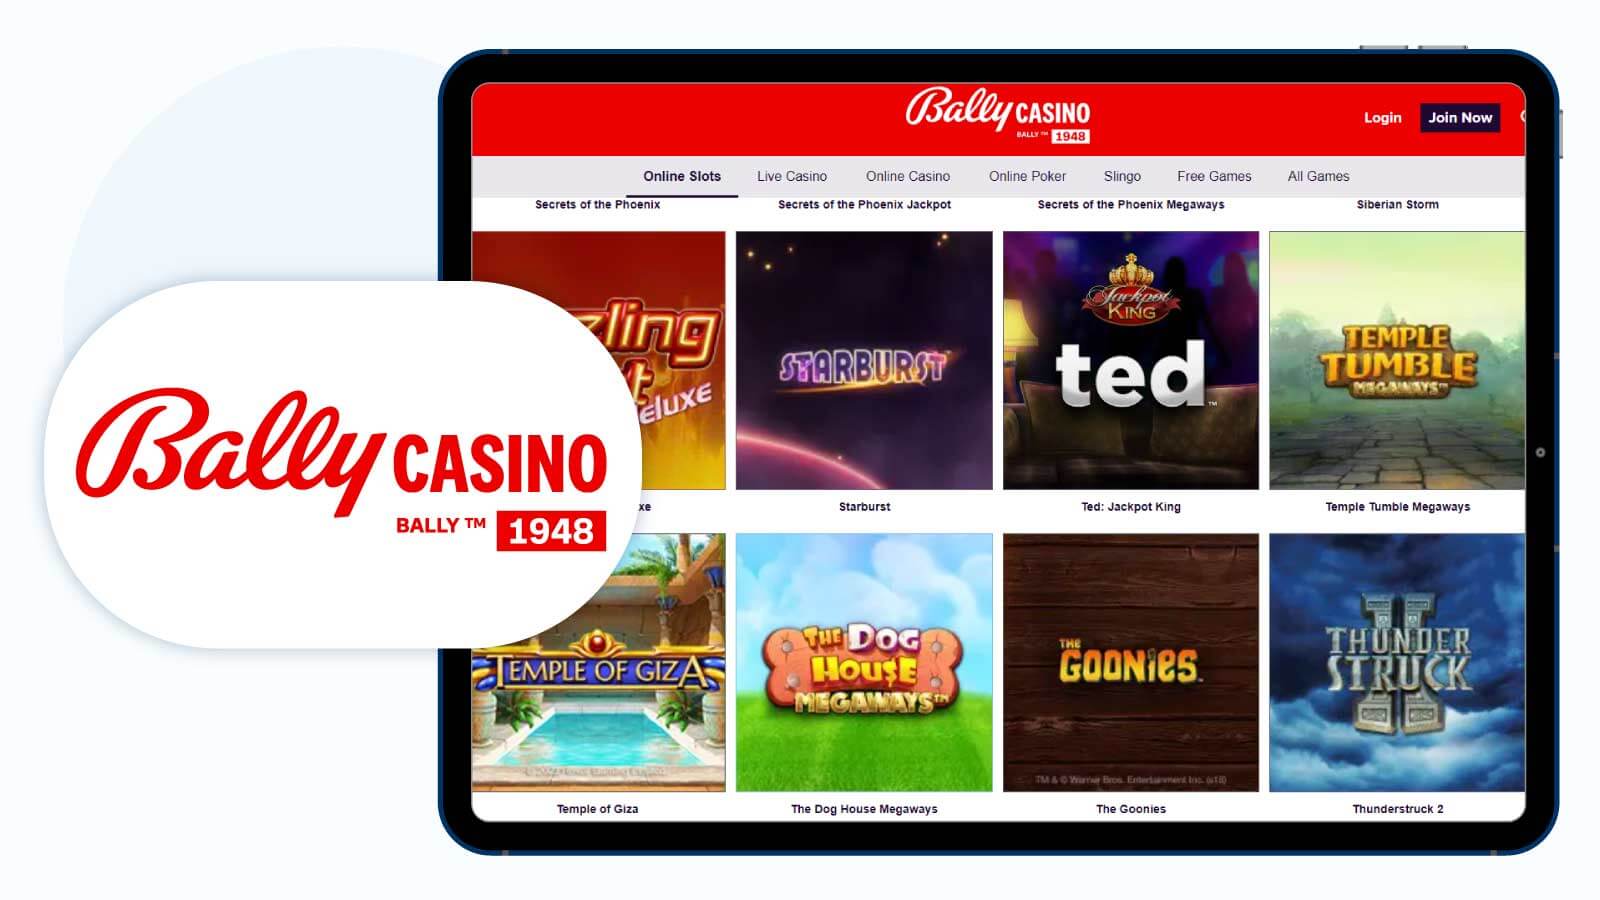 Bally Casino – The Best Eyecon Casino In the UK Overall